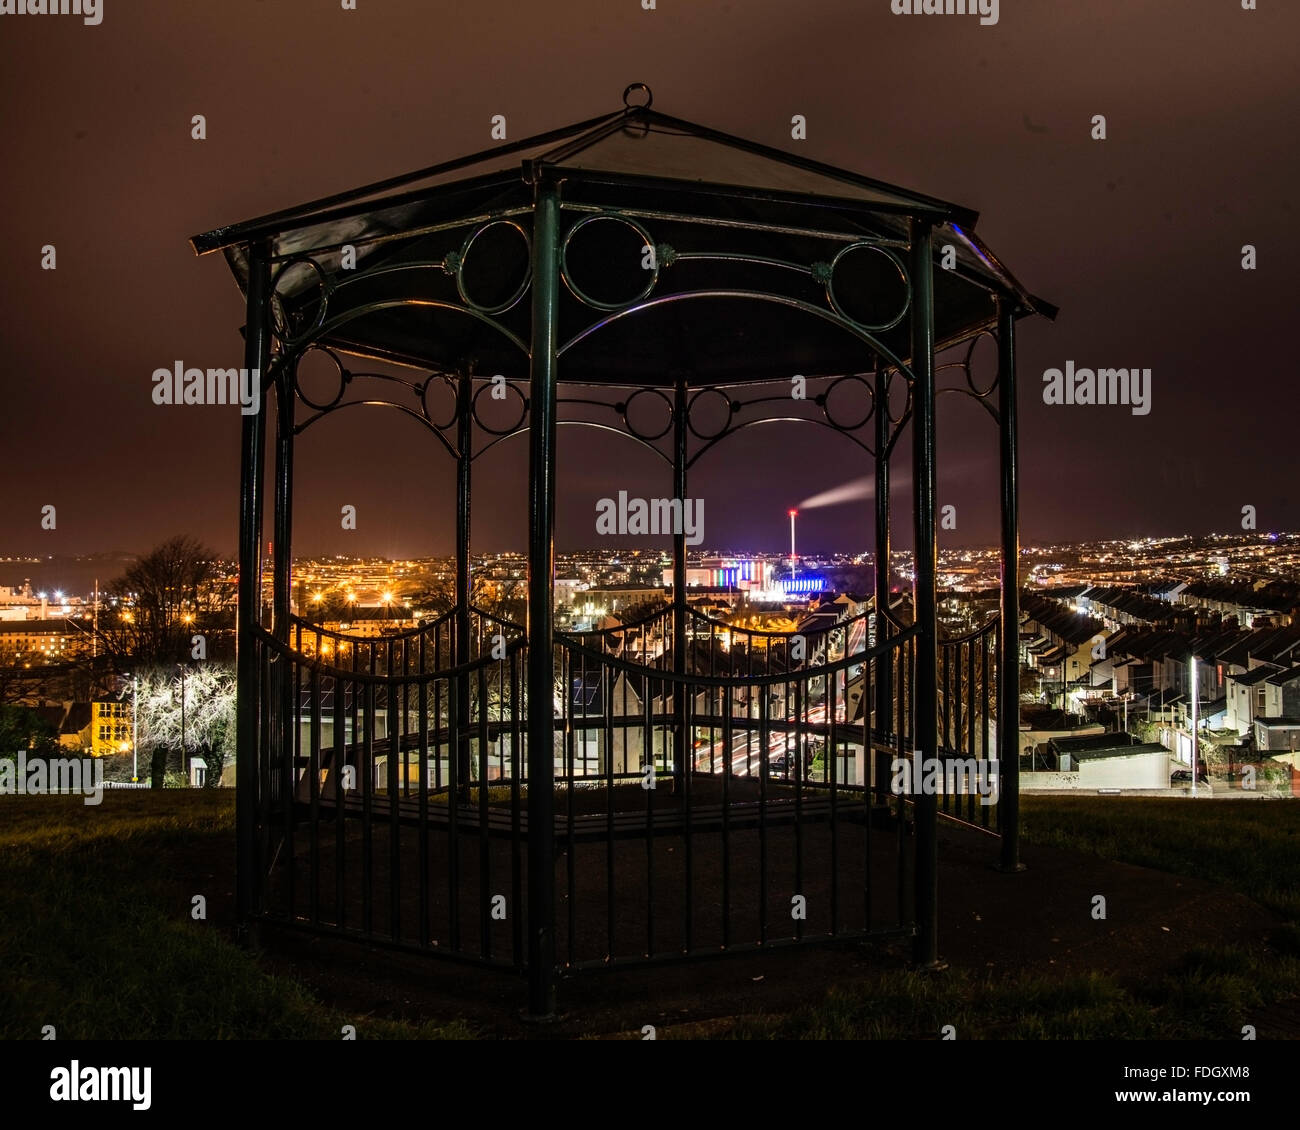 Nightime view over North Plymouth showing the Incinerator, taken through a bandstand in a park. Stock Photo